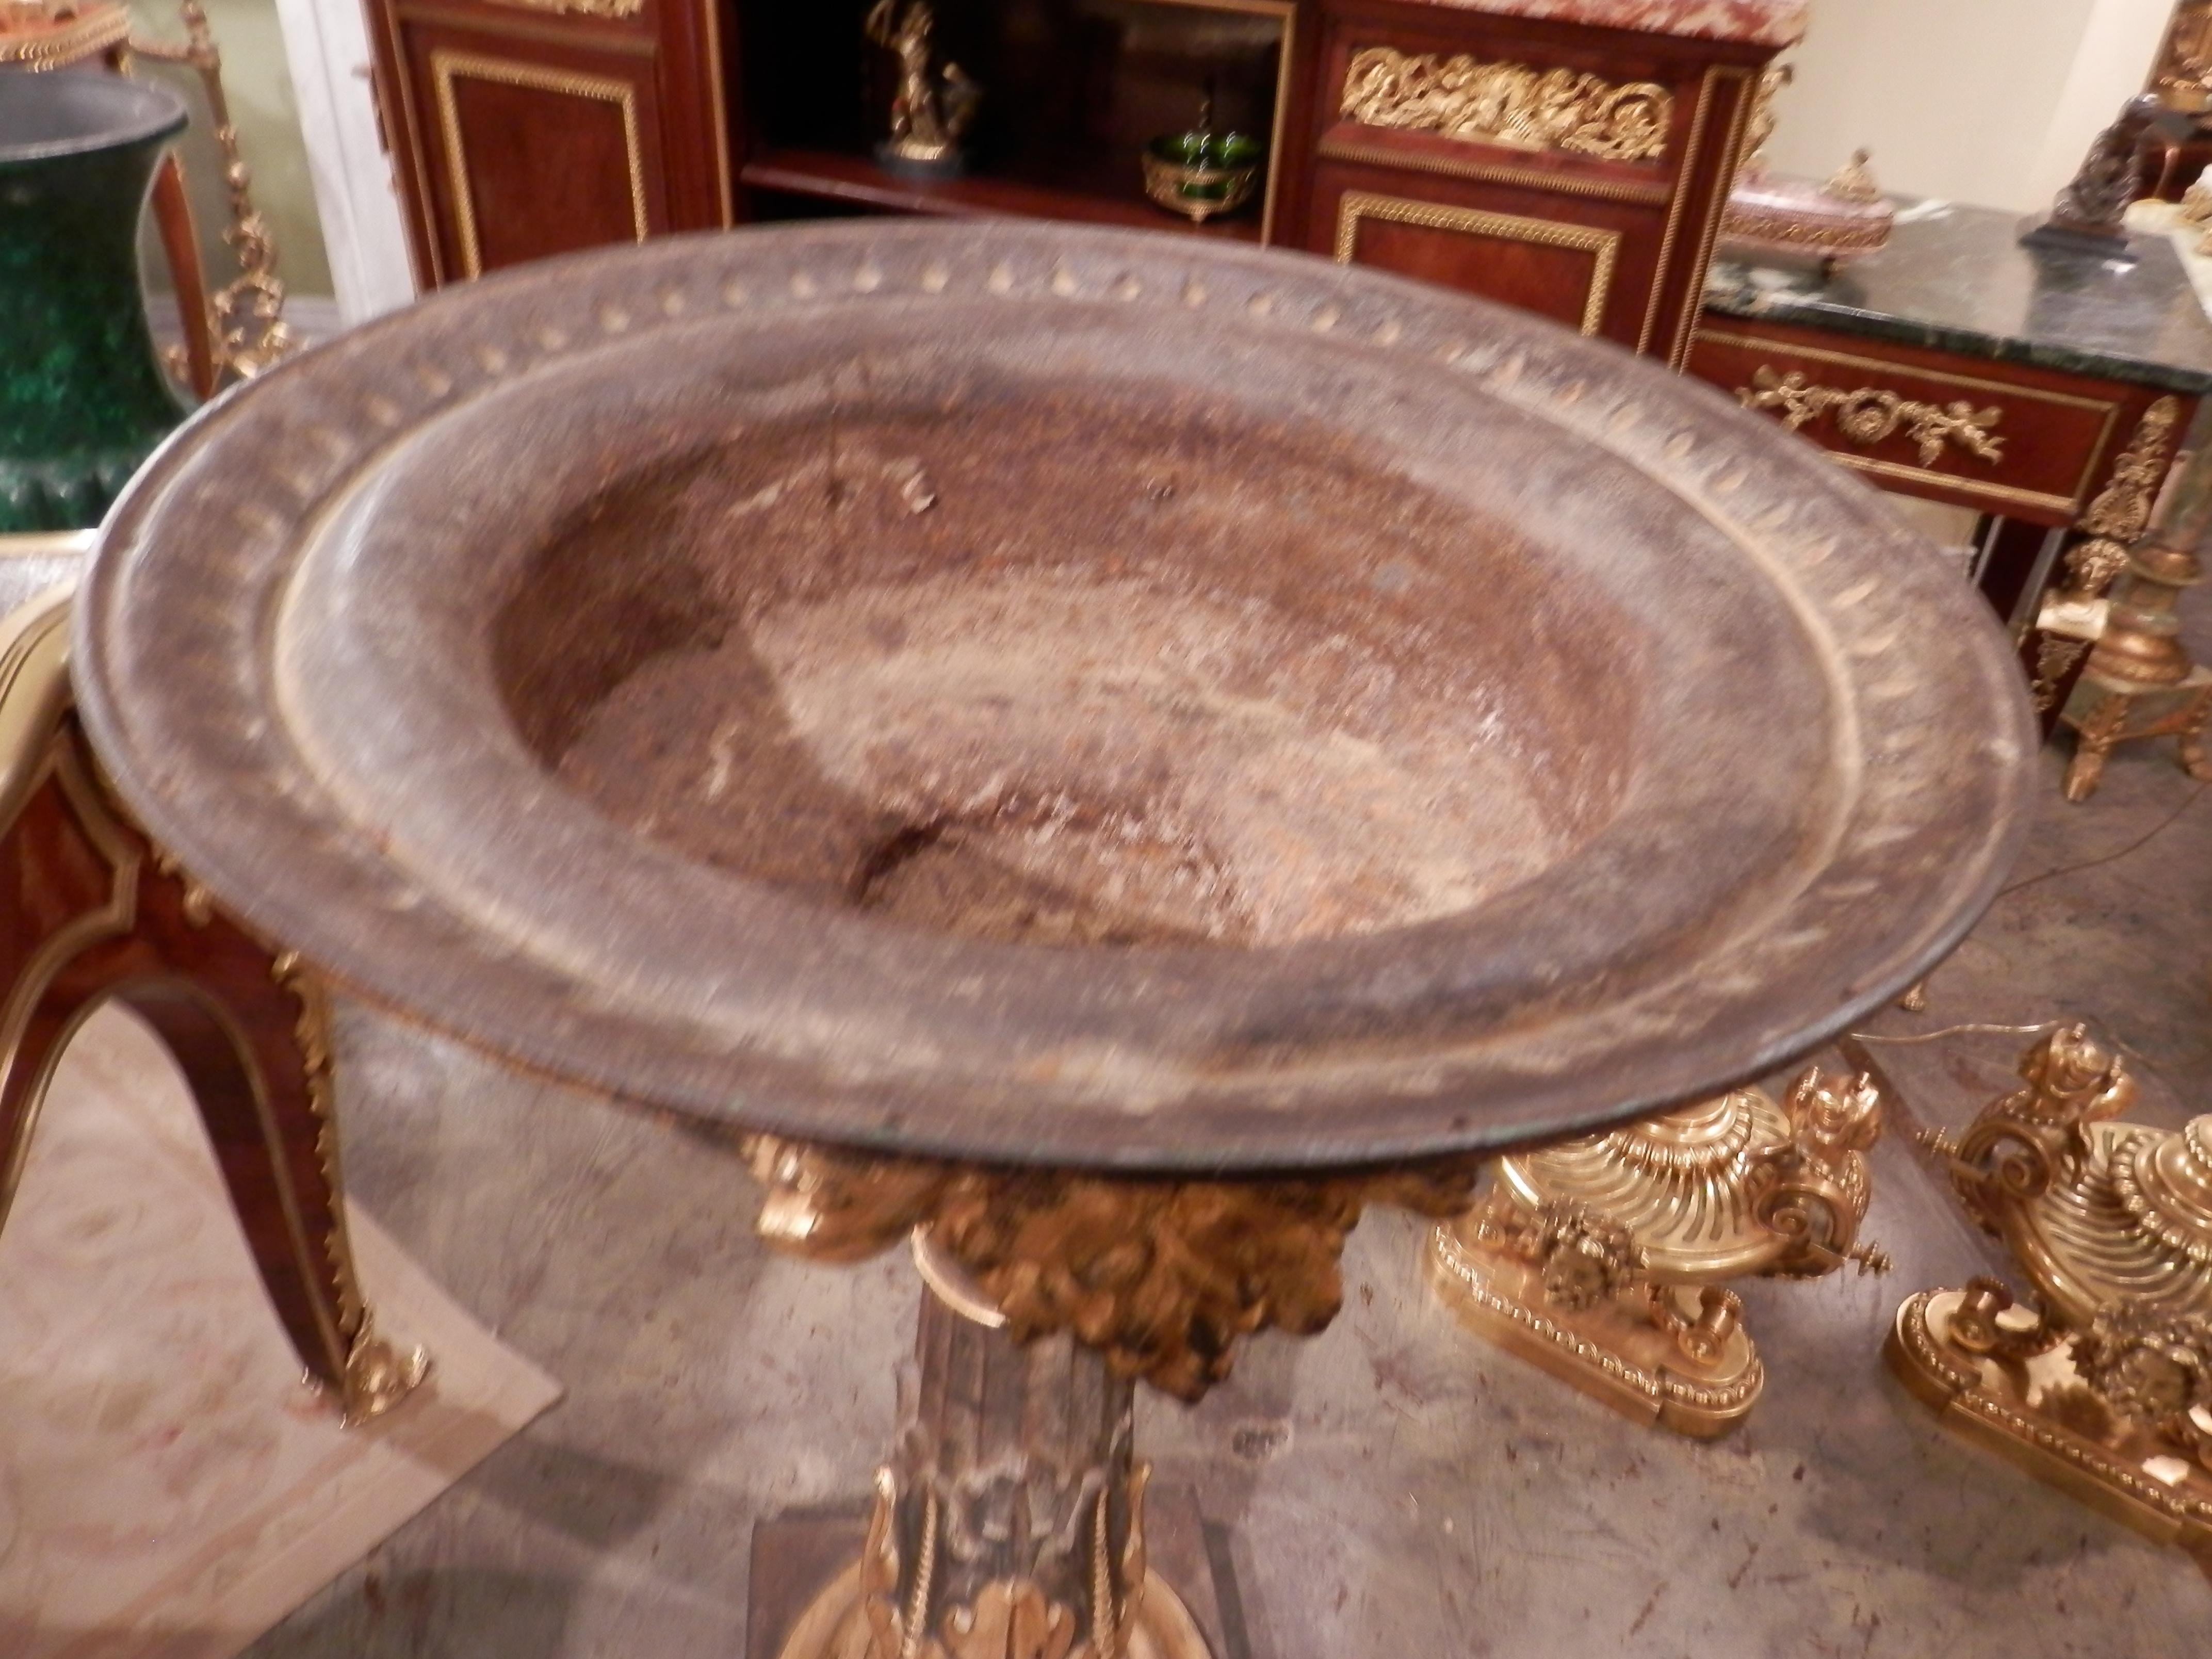 Large and impressive 19th century Continental iron and parcel gilt fountain or birdbath. Beautiful detail and quality.